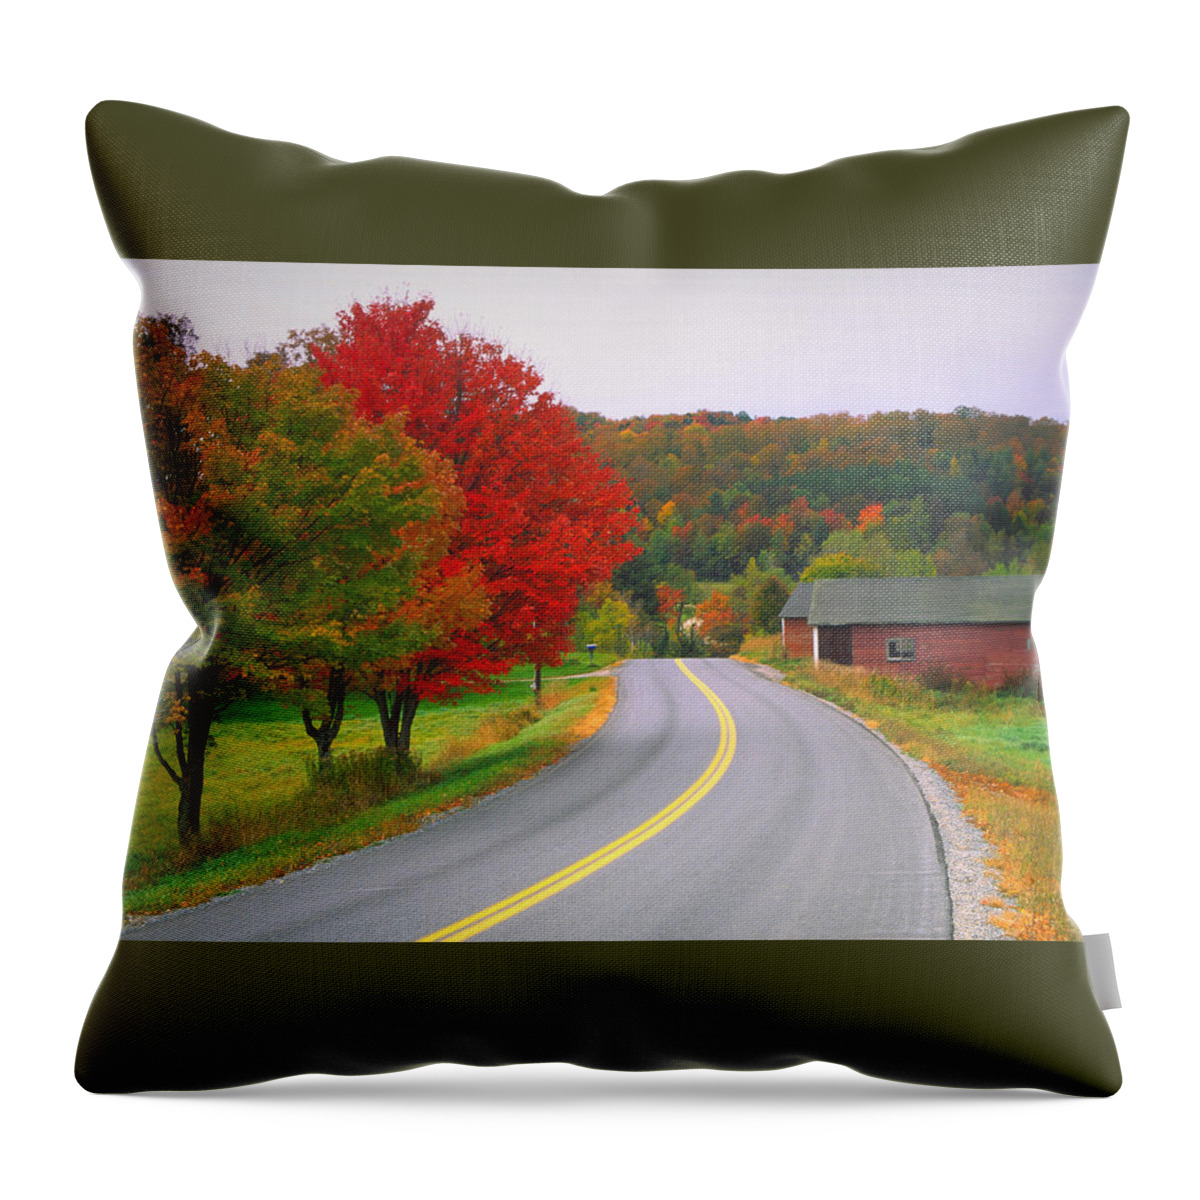 Scenics Throw Pillow featuring the photograph Autumn Road by Denistangneyjr